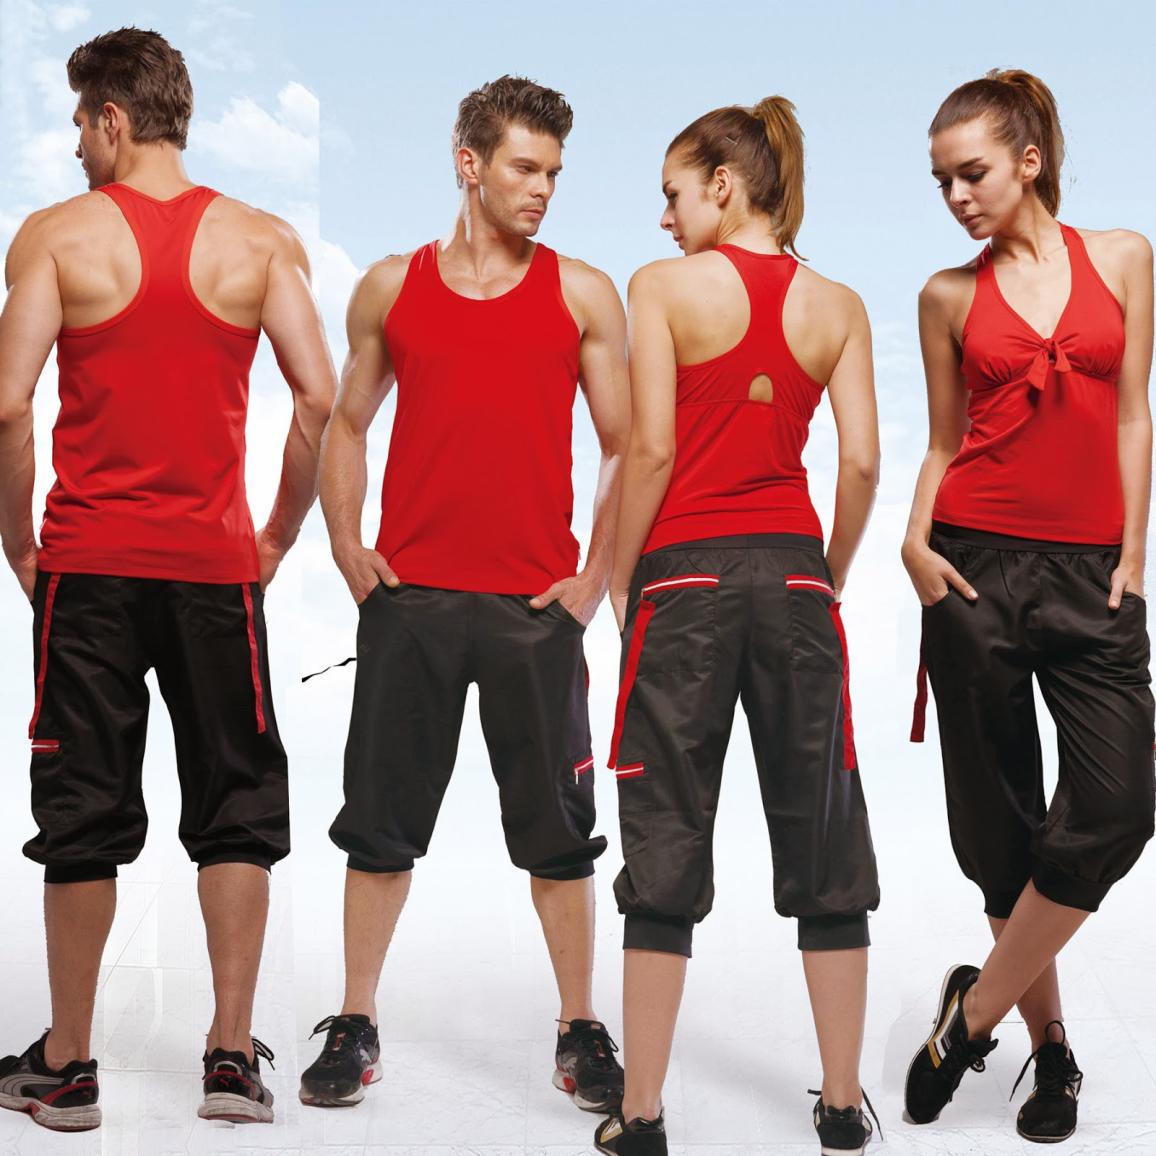 How Do Activewear Fashion Workout Clothes Impact My Performance And Comfort?